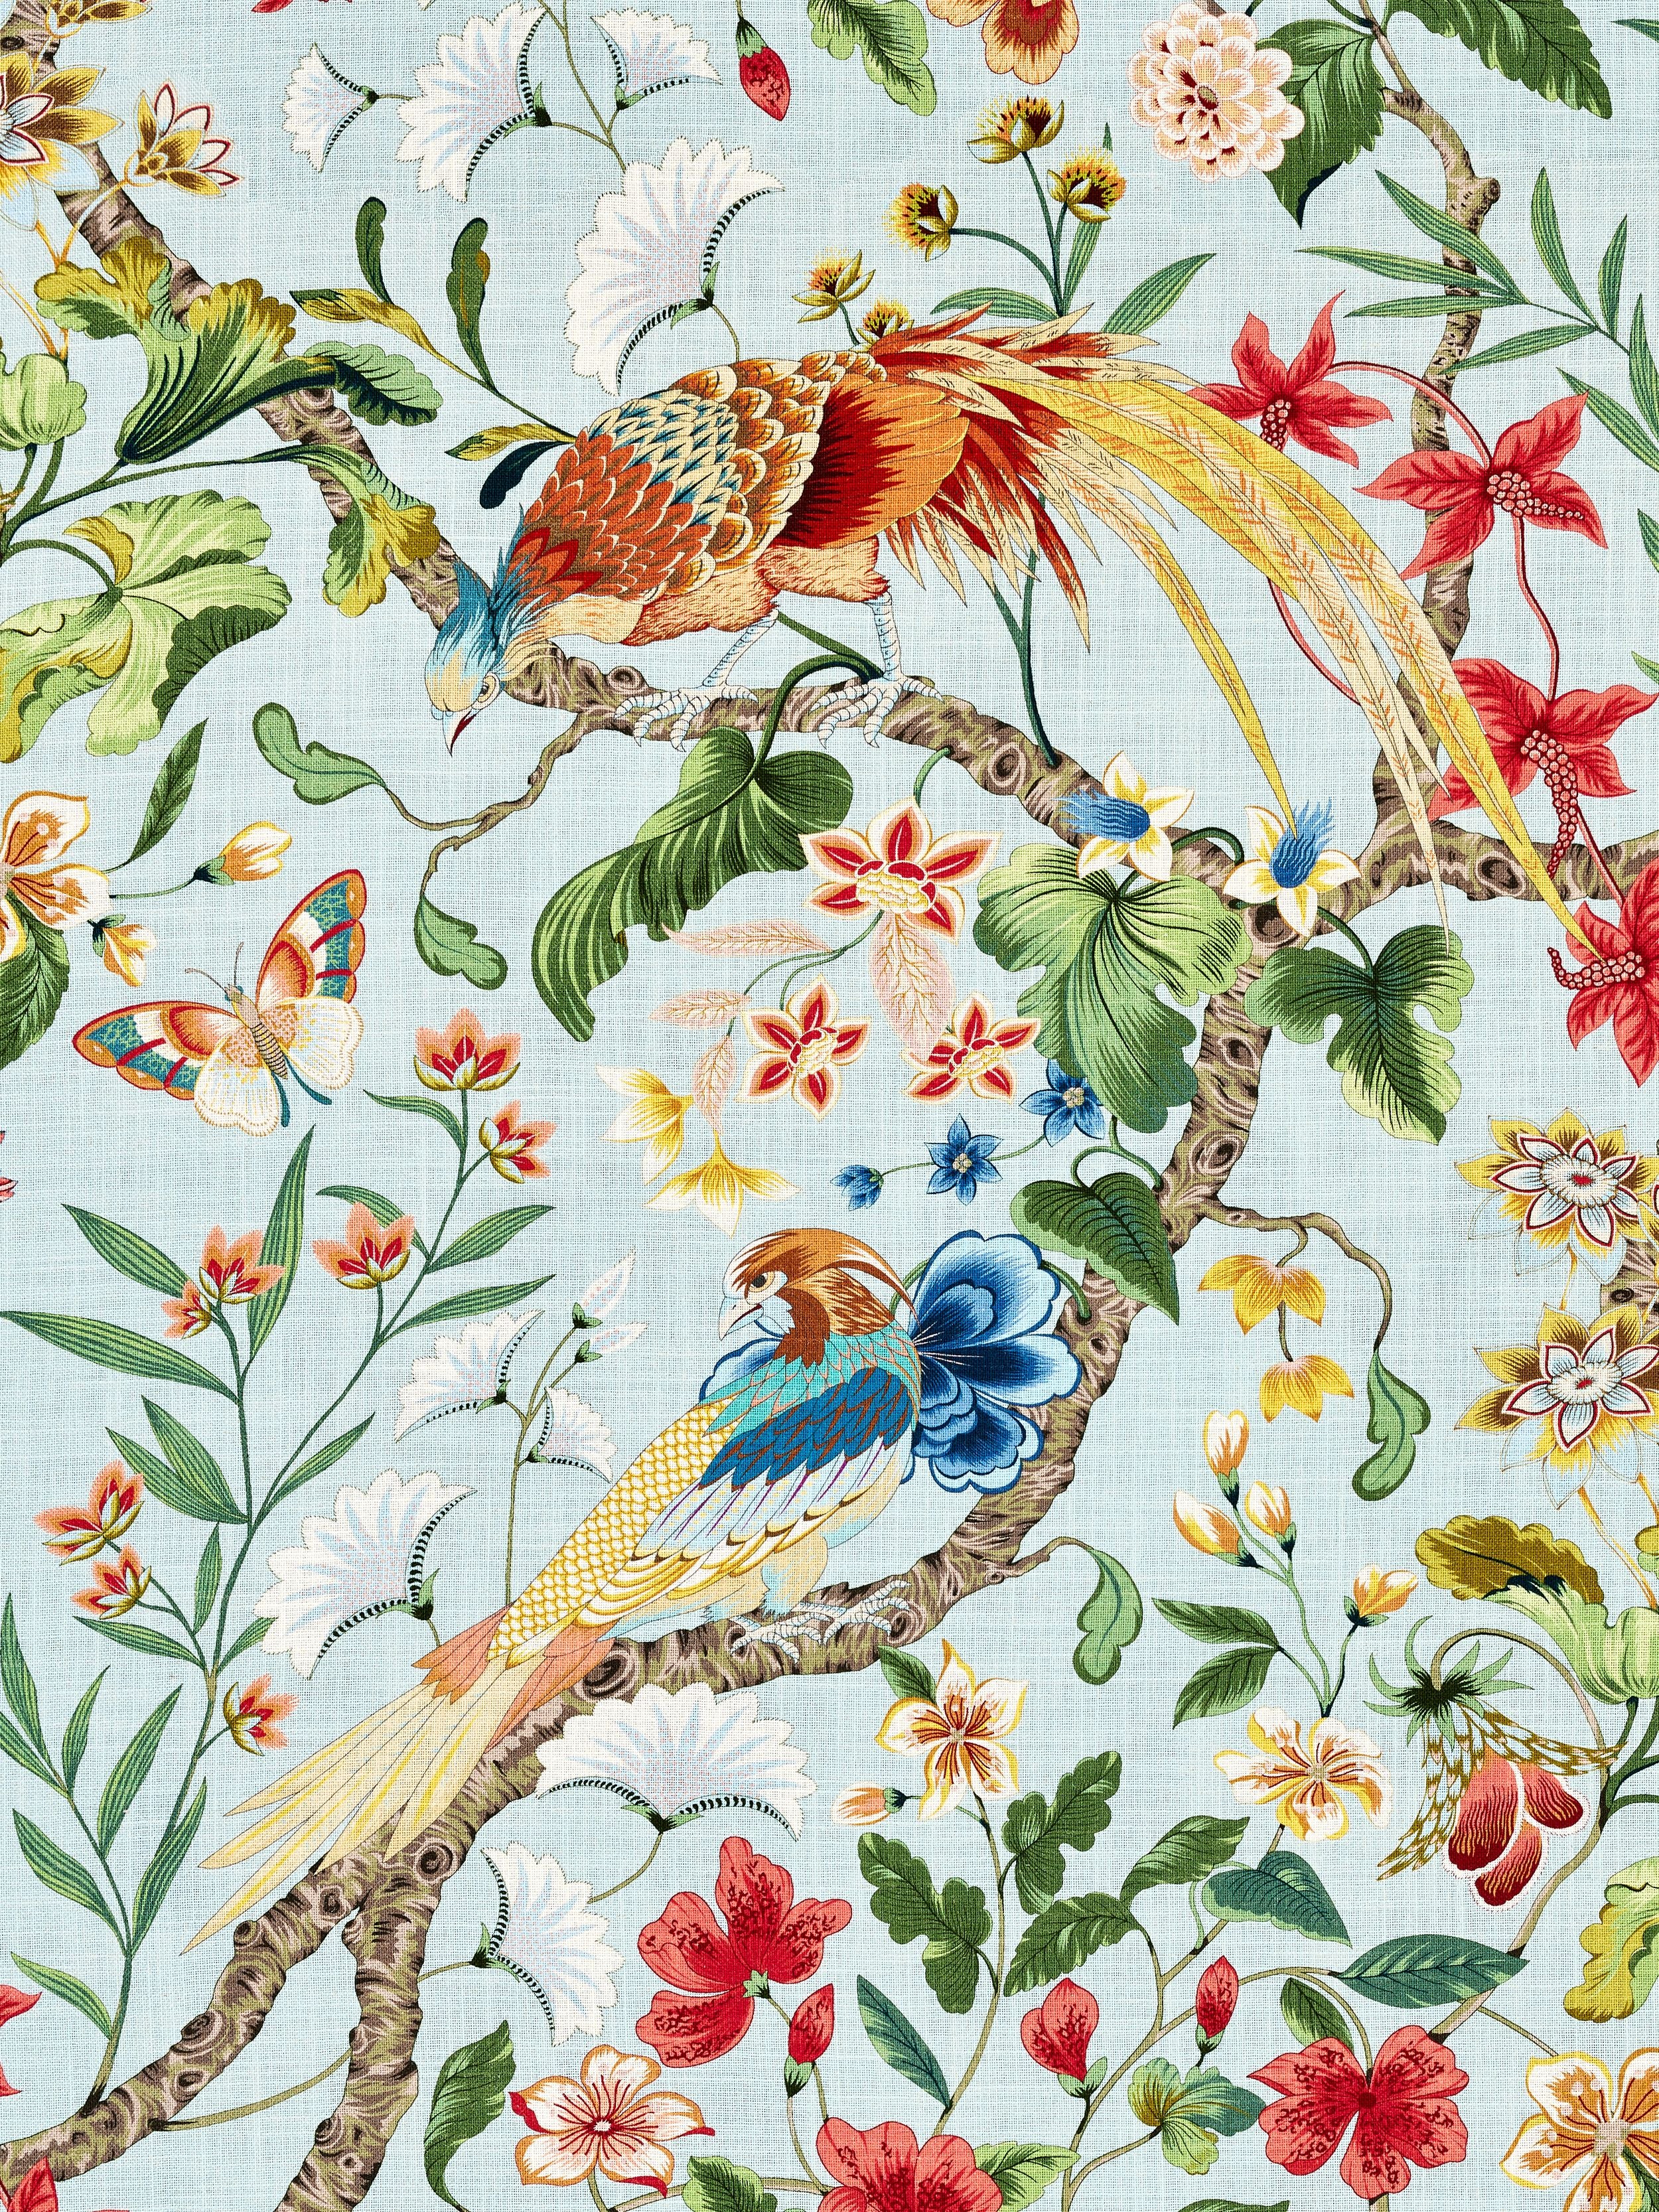 Botany Bay fabric in sky multi color - pattern number JP 00011340 - by Scalamandre in the Old World Weavers collection